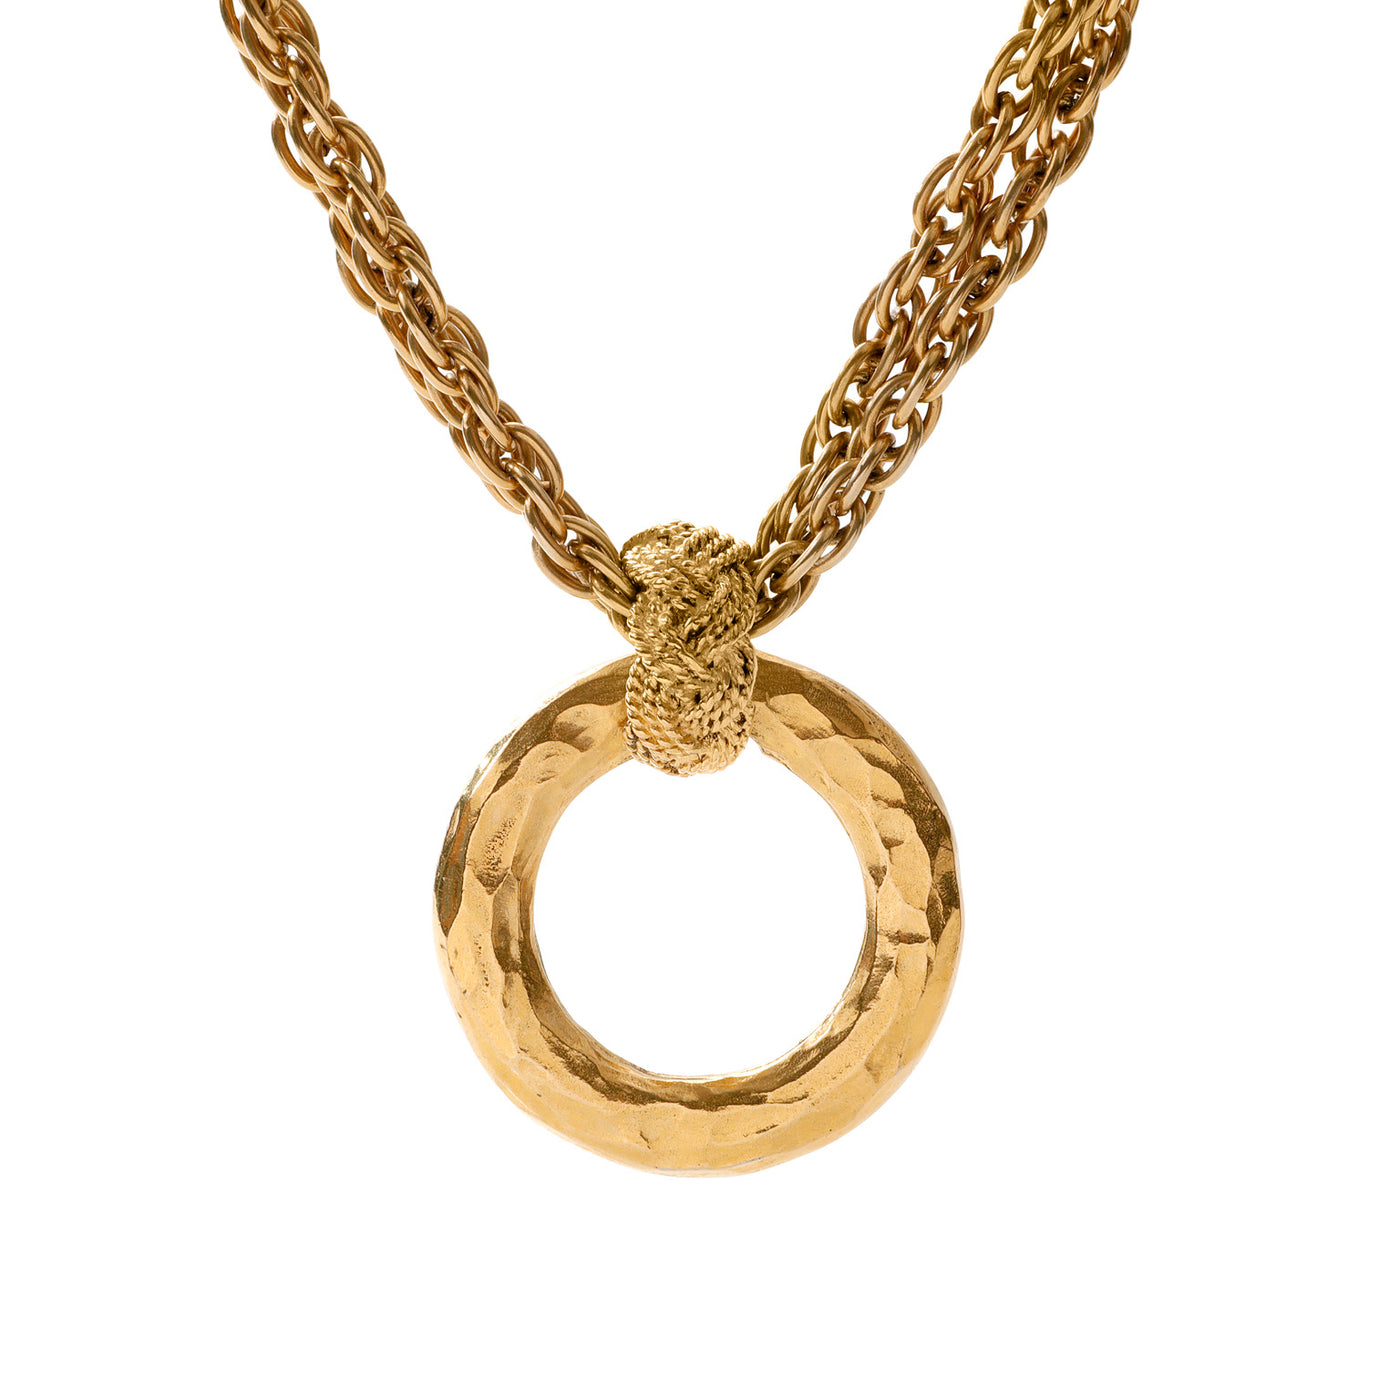 Chanel Vintage Gold Double Chain Ring Pendant Choker